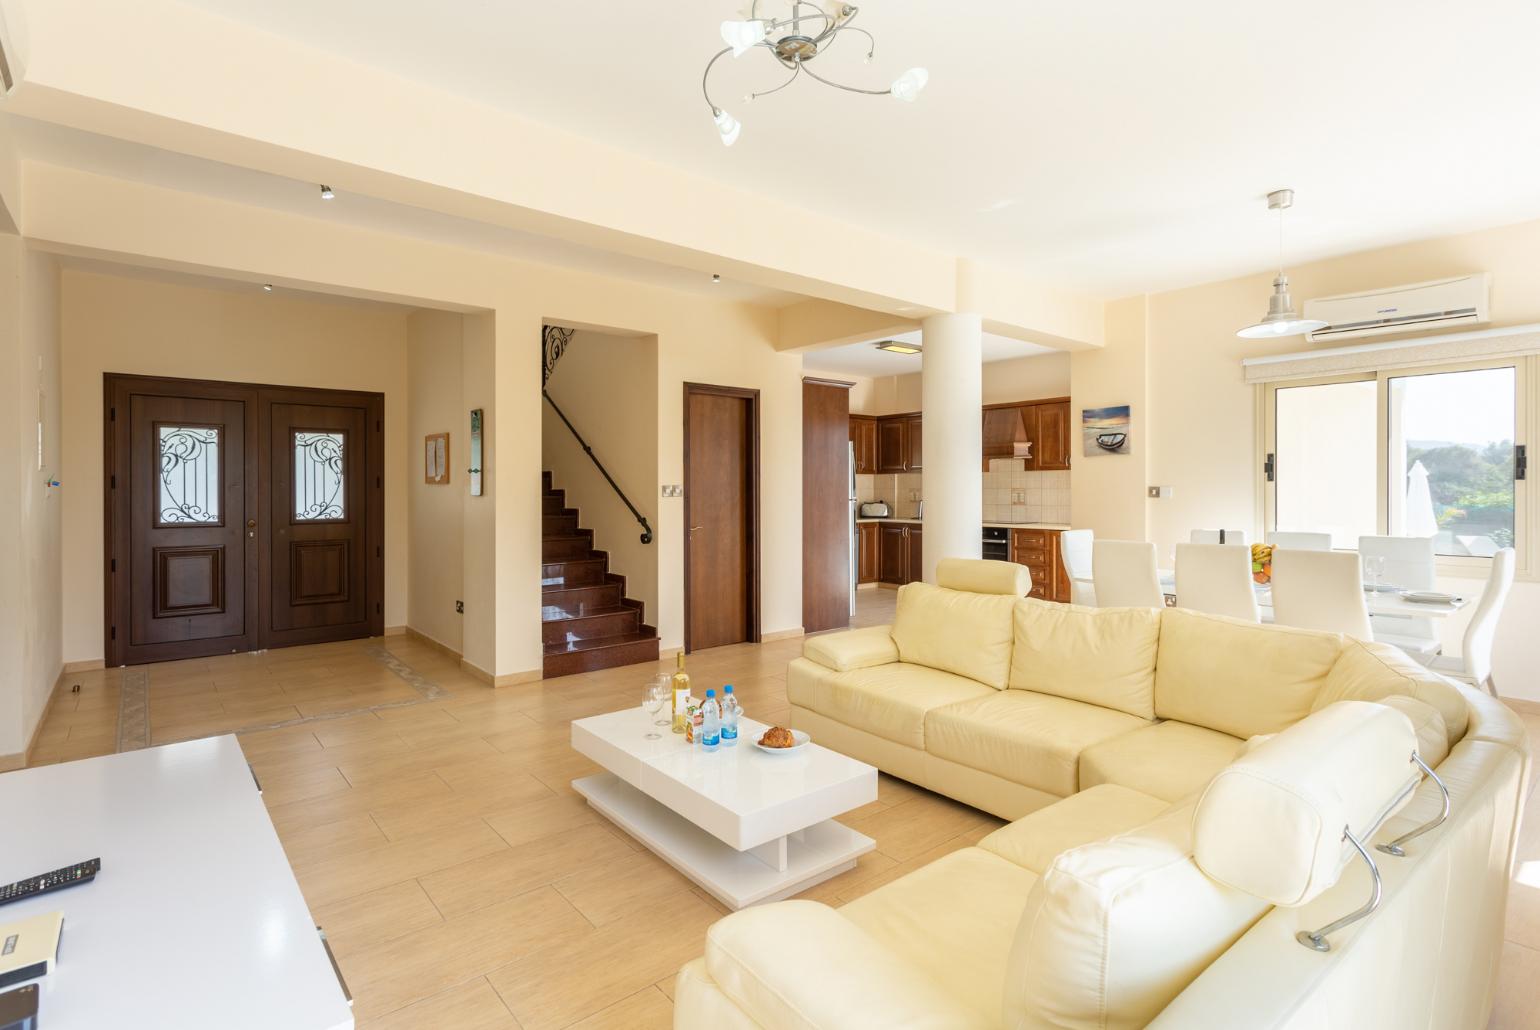 Open-plan living room with sofas, dining area, kitchen, ornamental fireplace, A/C, WiFi internet, and satellite TV